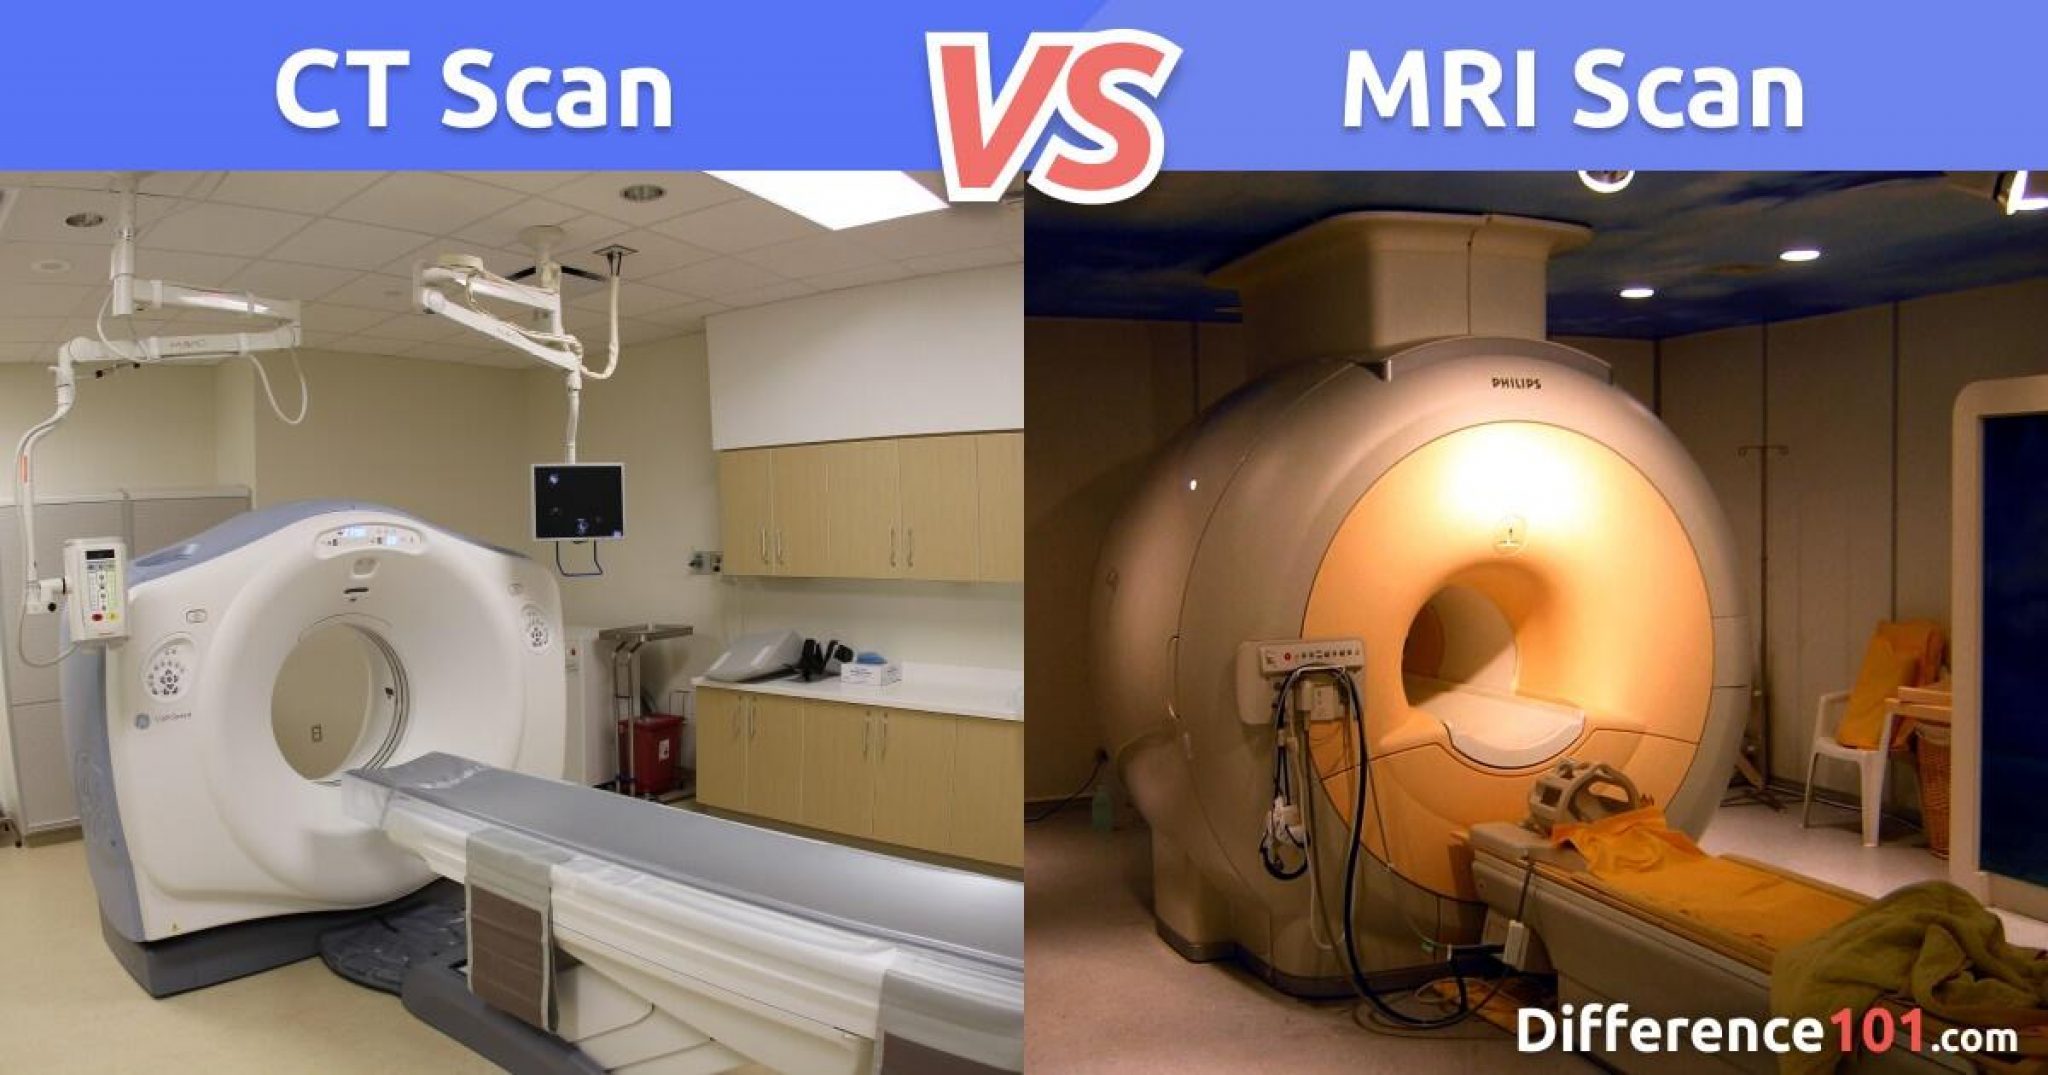 Difference Between Ct Scan And Mri Imaging